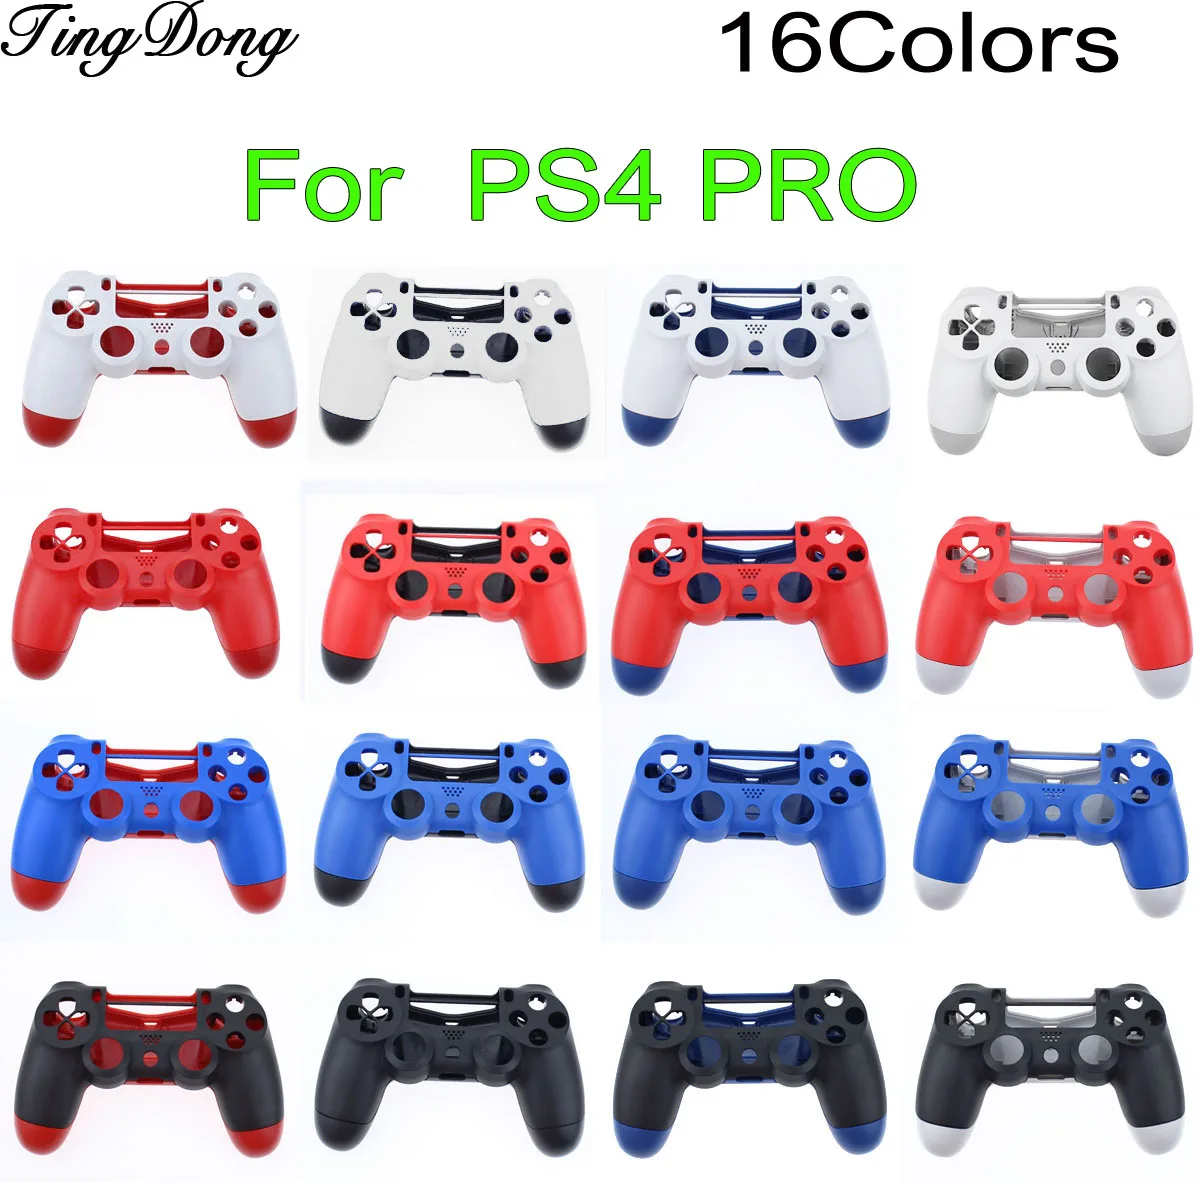 20Pcs for Sony PS4 Pro Wireless Dualshock 4 Pro Controller JDS040 Cover Front Back Hard Plastic Upper Housing Shell Case